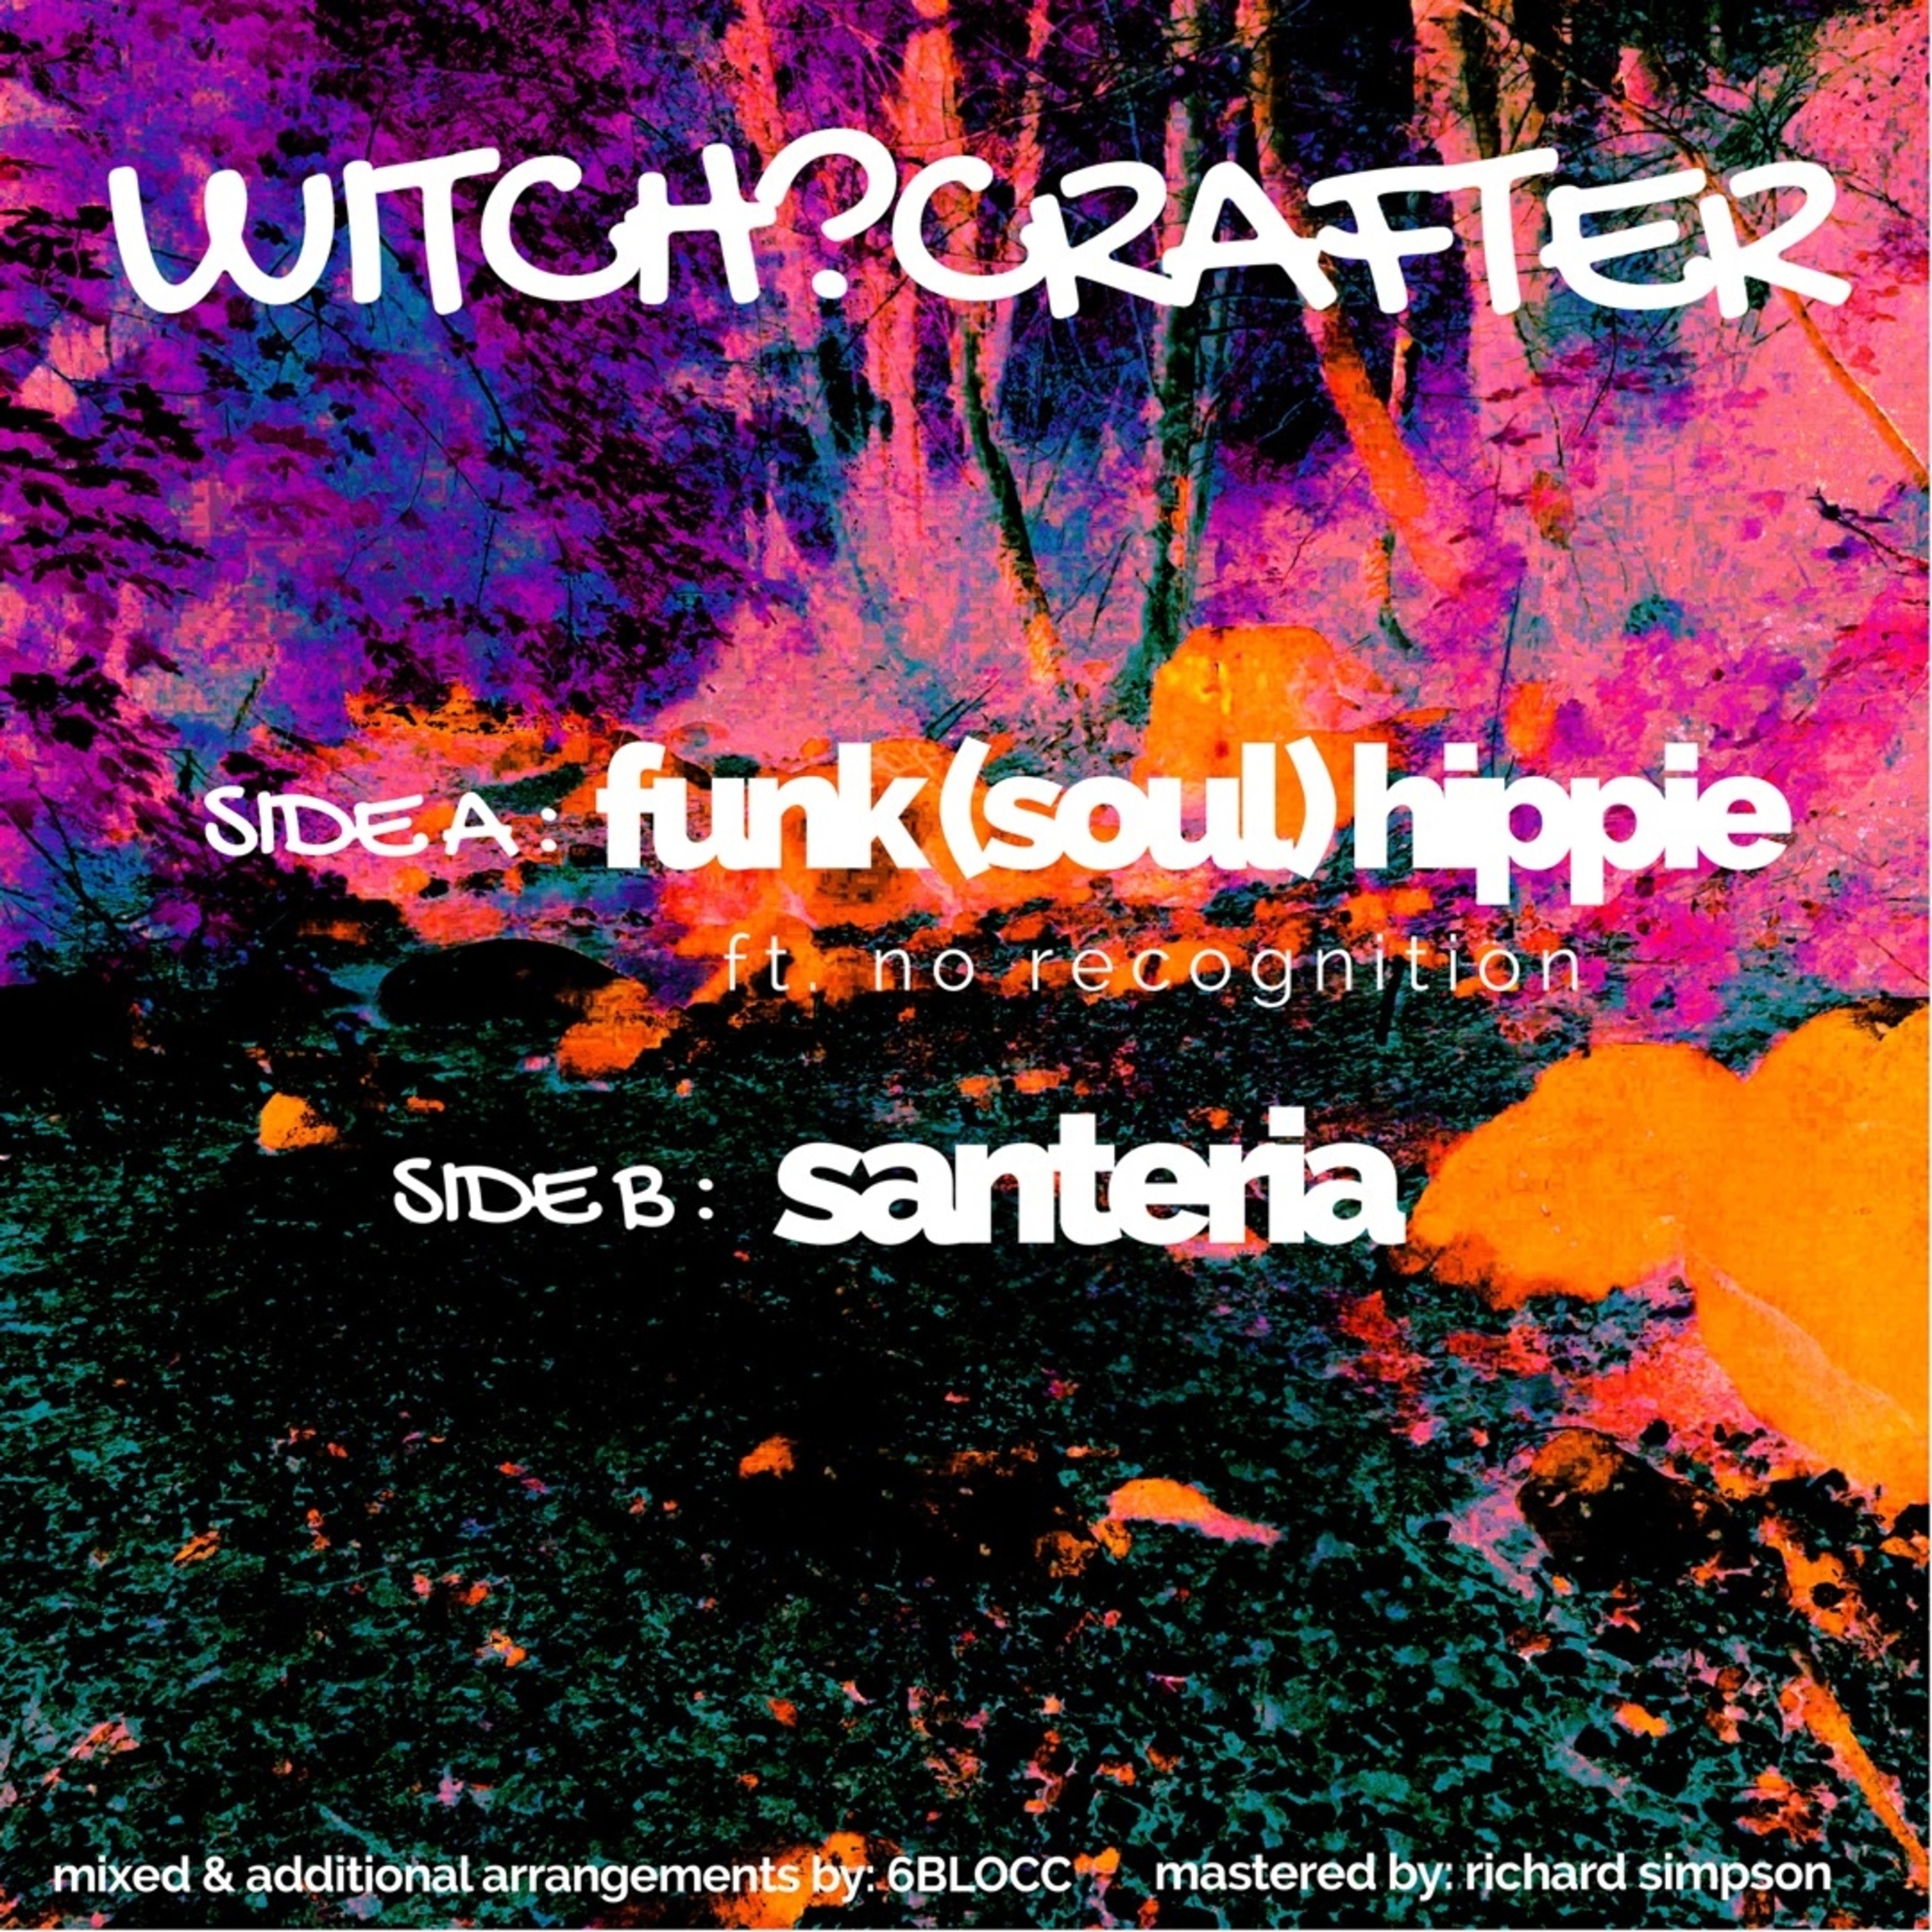 Witch?Crafter/FUNK (SOUL) HIPPIE 12"